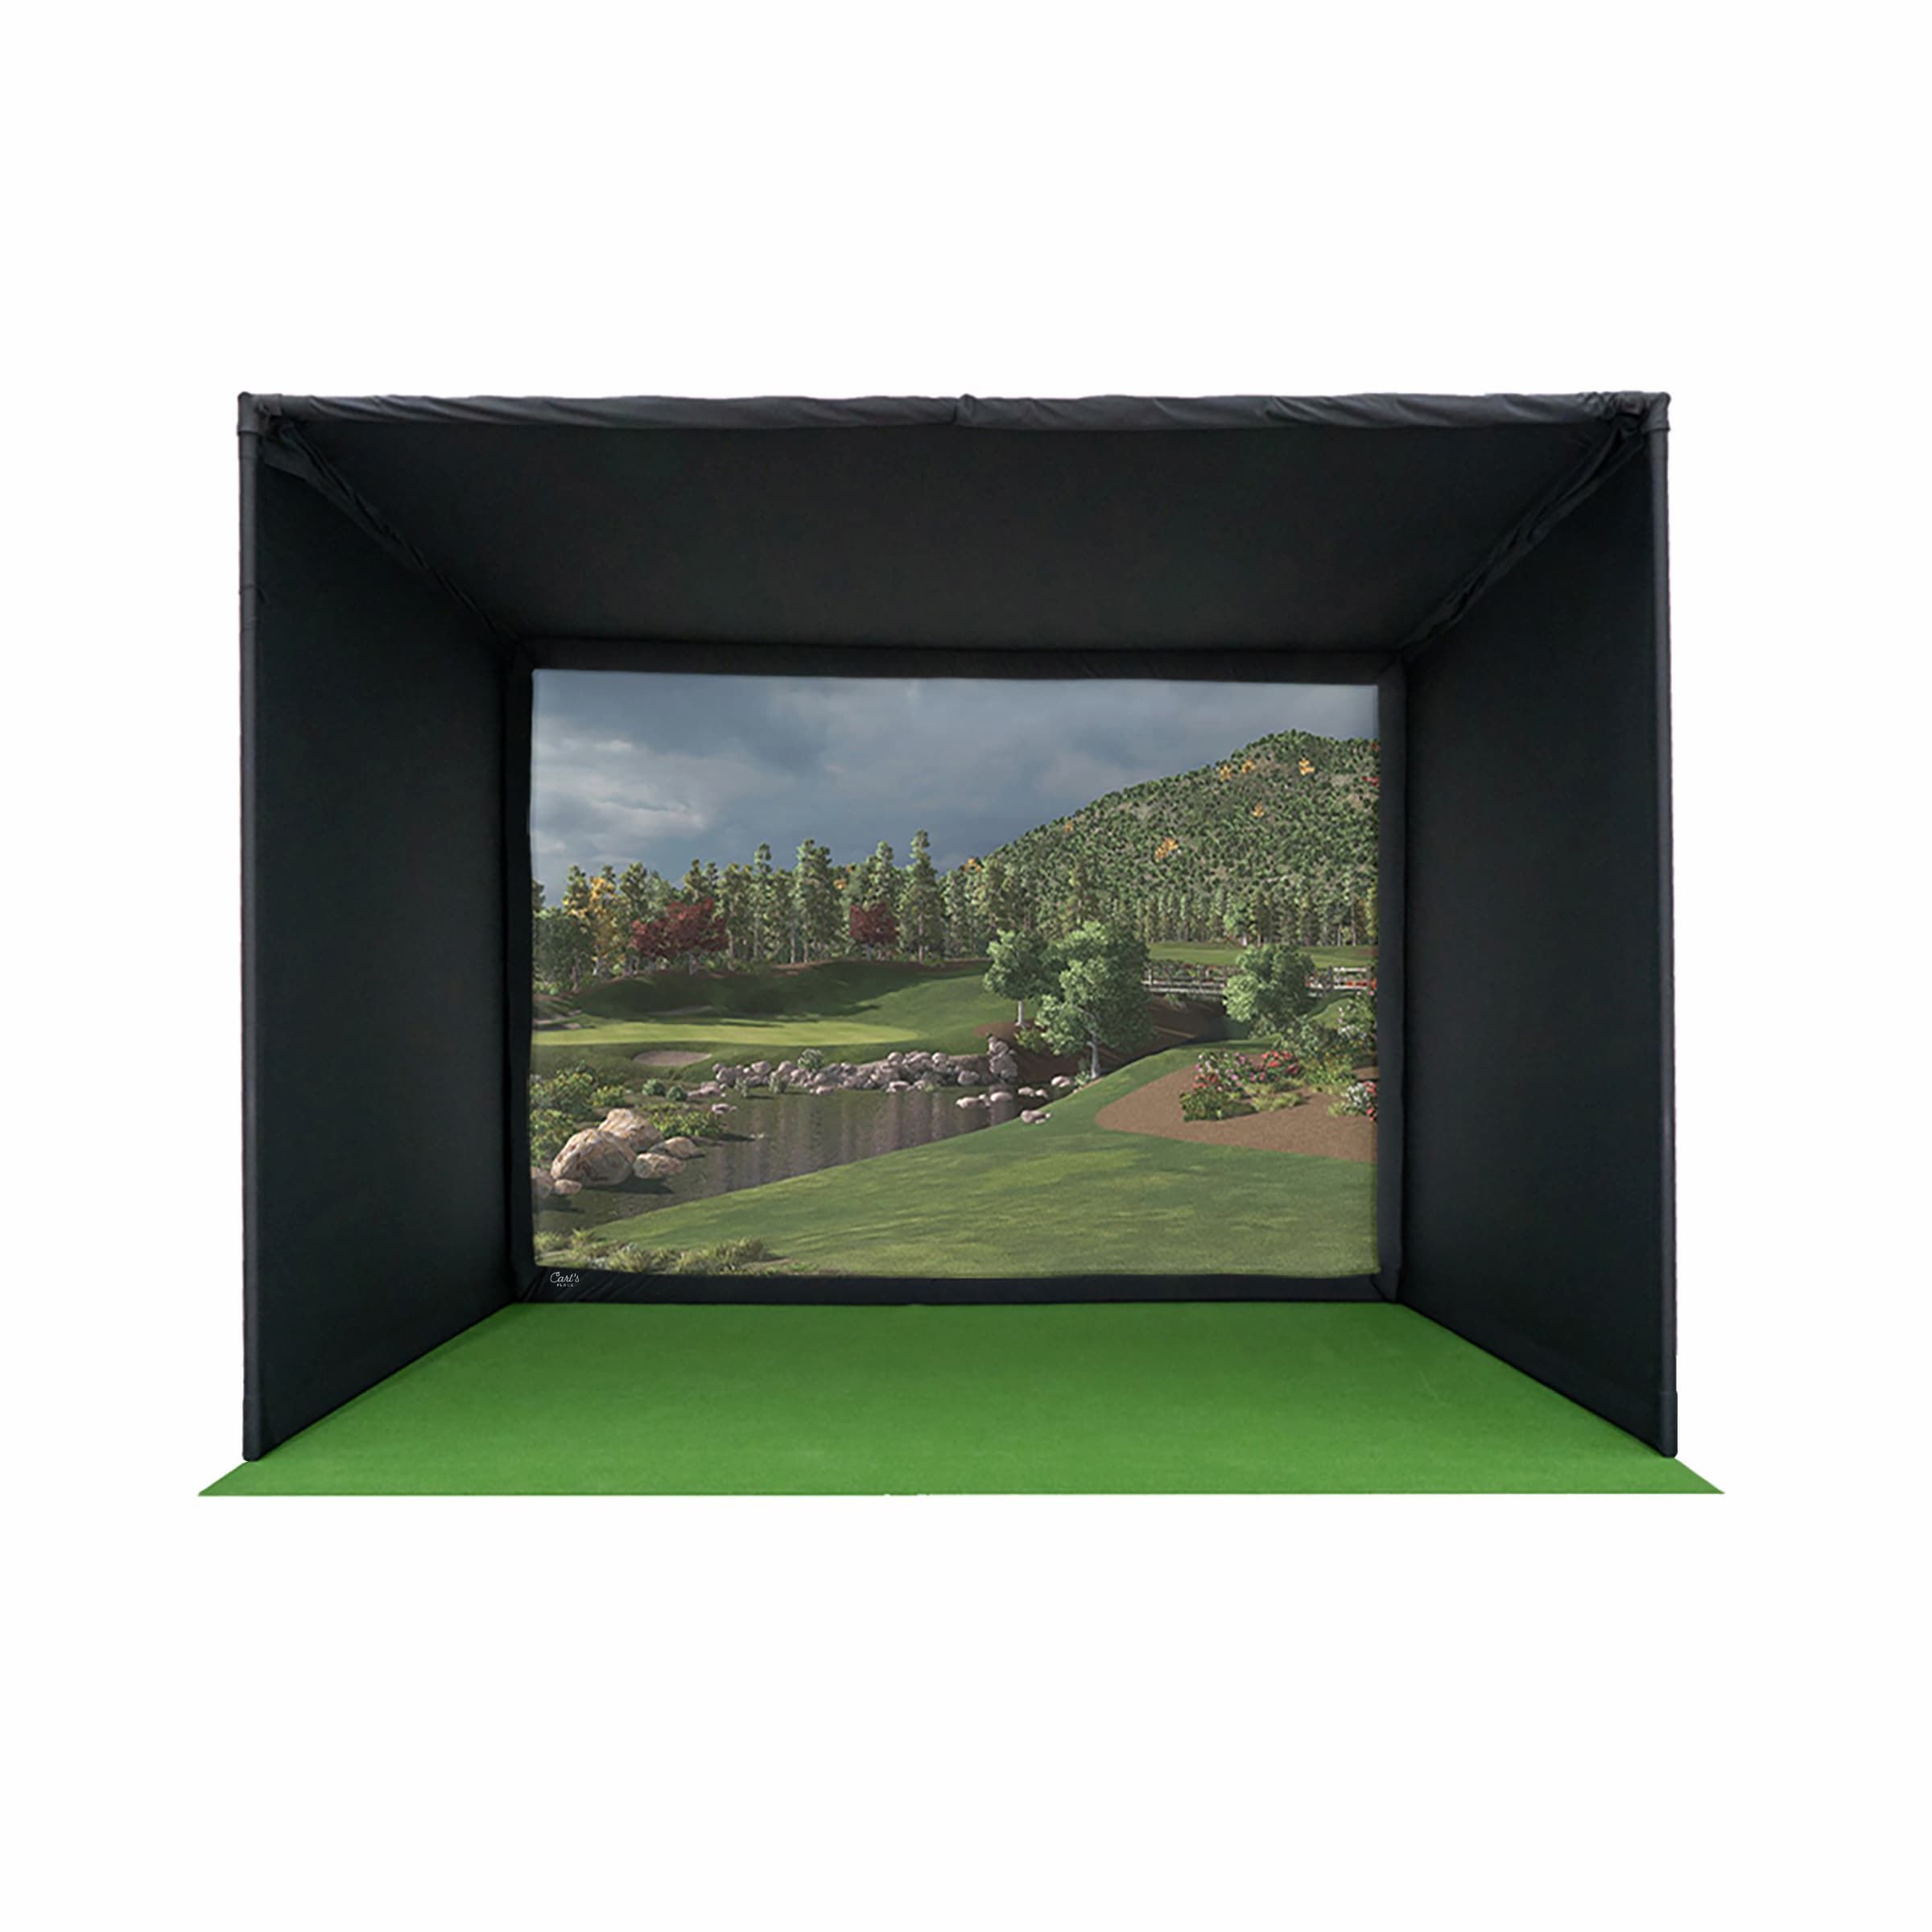 Extra Carl's Golf Mat Insert - Carl's Place - Carl's Place